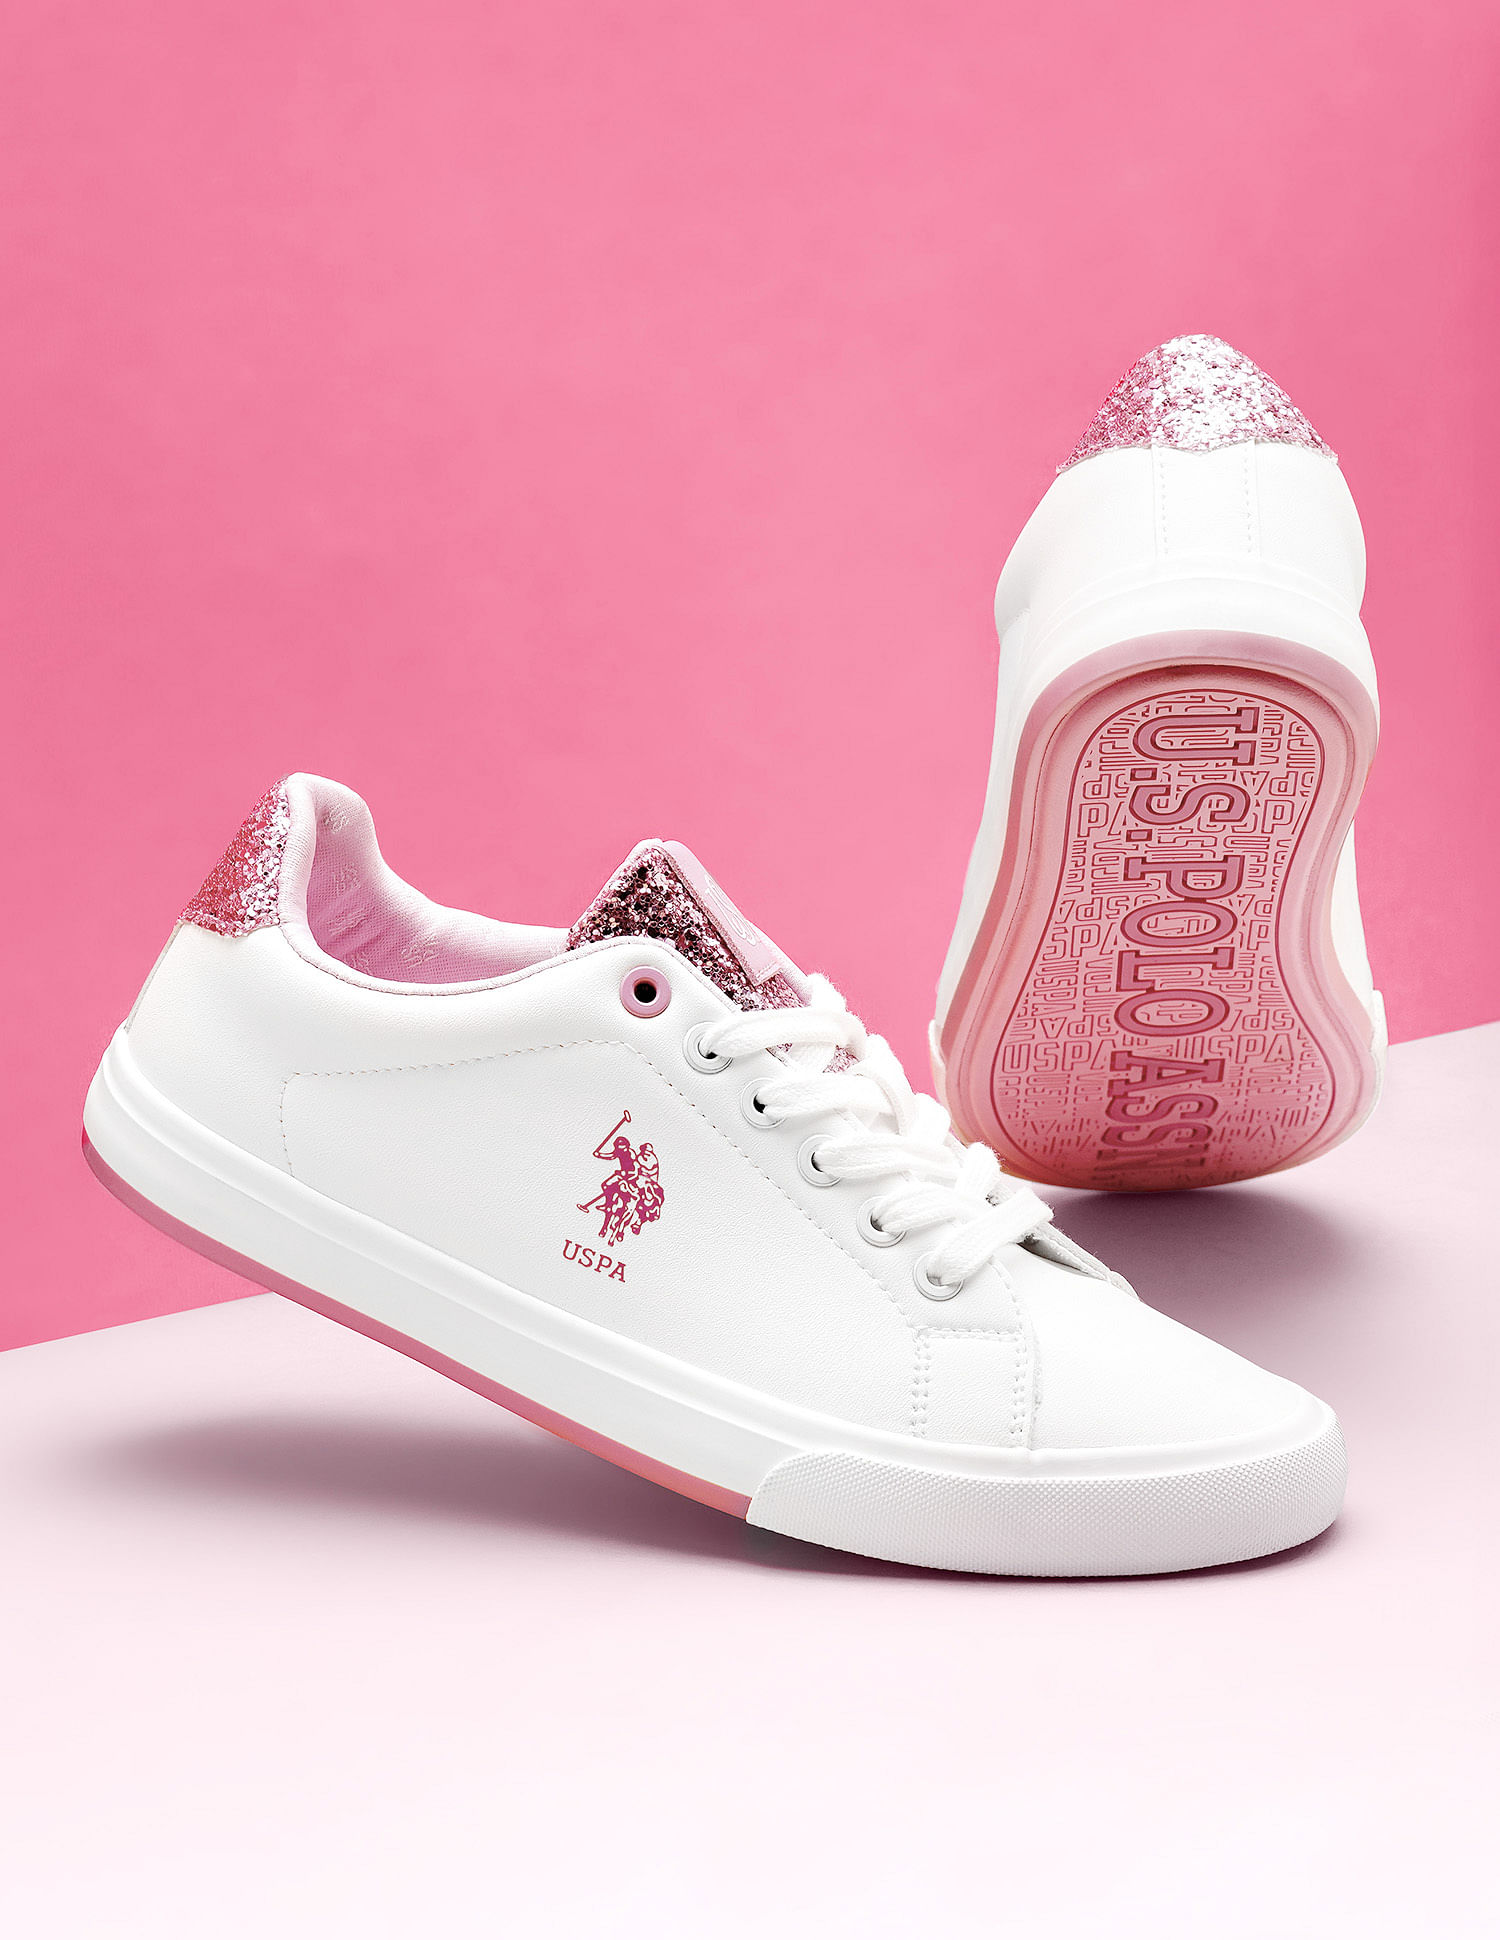 Juicy Couture Camo Print Aviel Sneakers for Women Online India at  Darveys.com